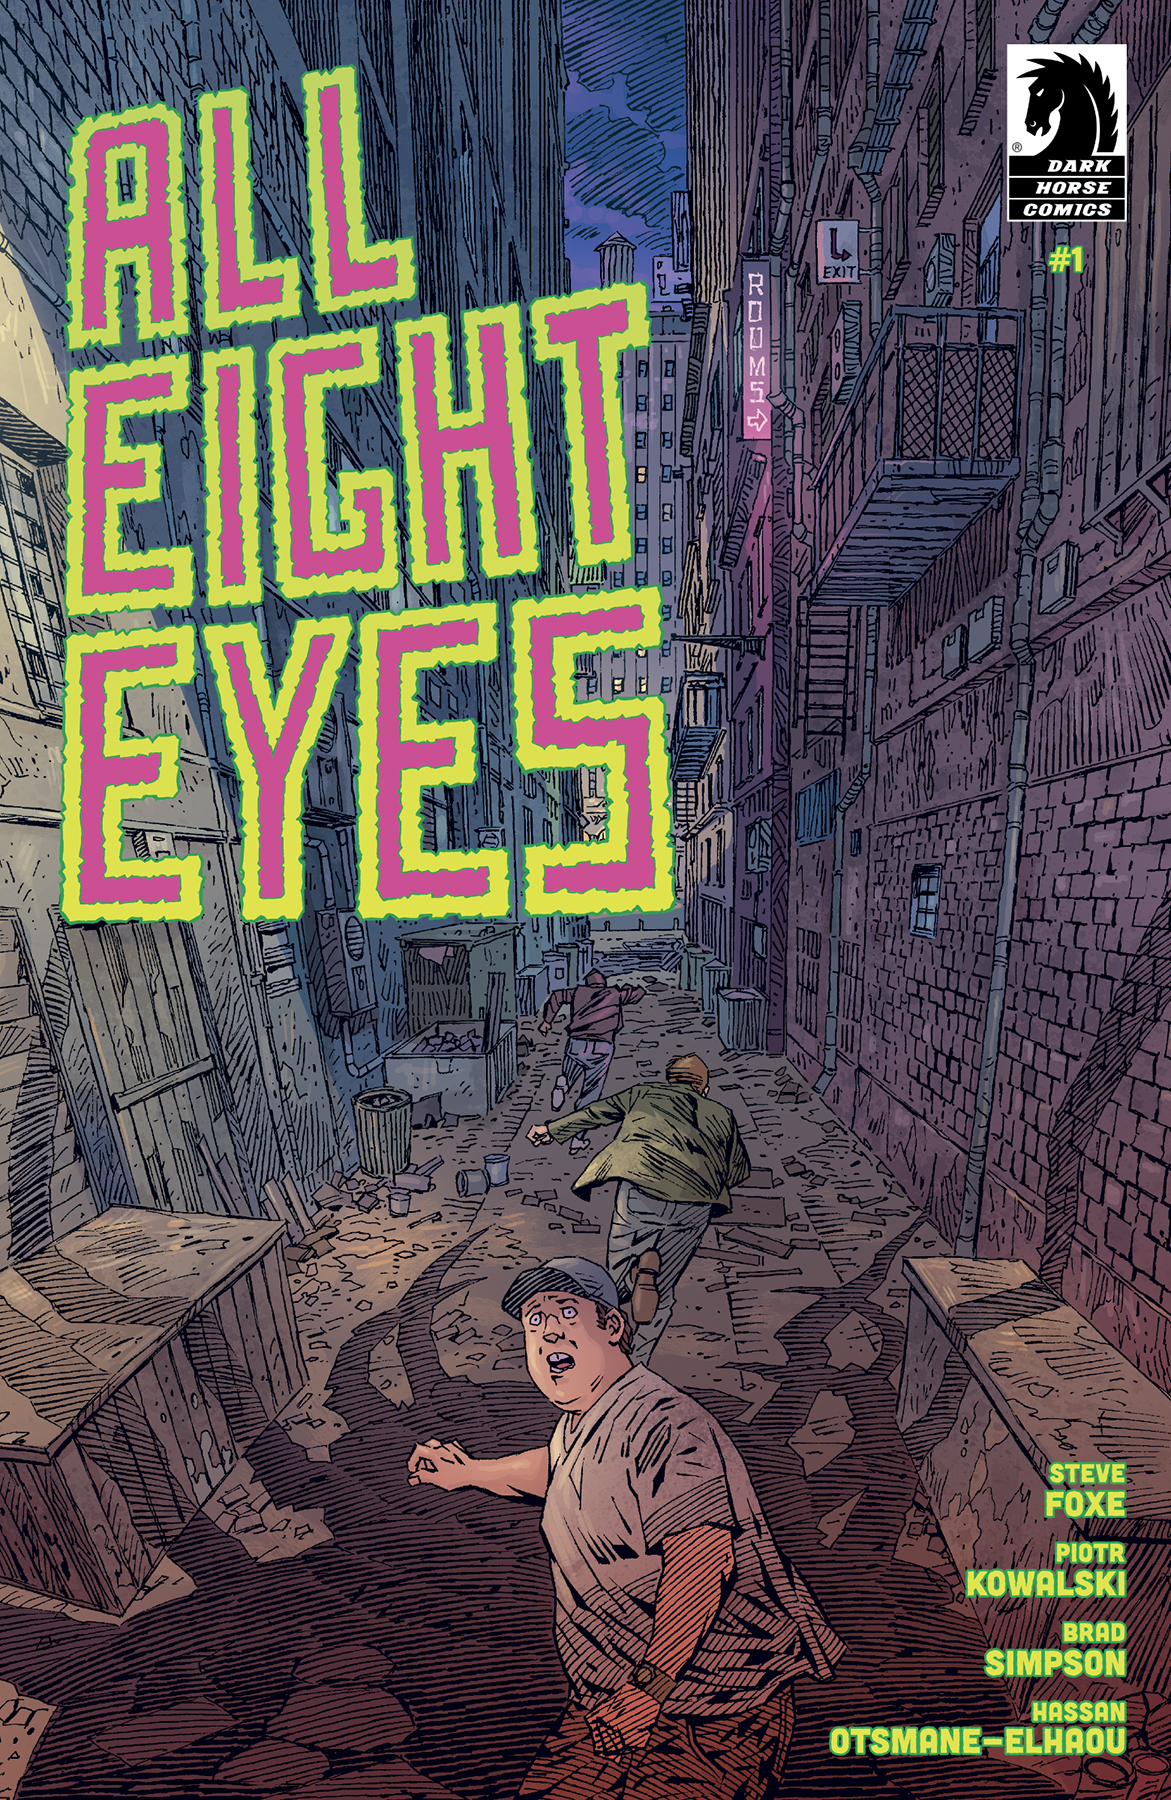 All Eight Eyes #1 Cover A Kowalski (Of 4)